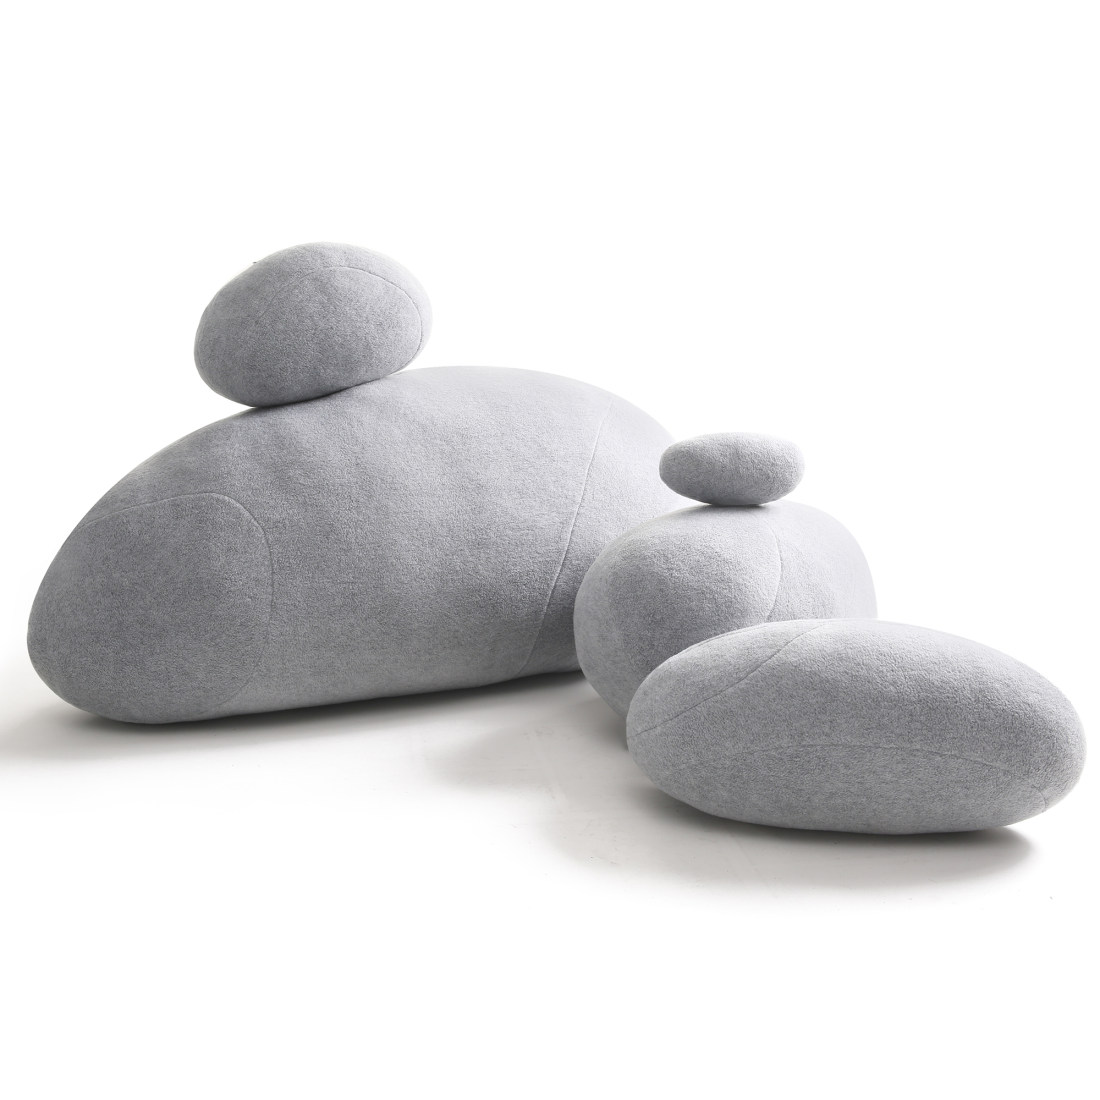  Sheicon Three-Dimensional Curve Realistic Stones Floor Pillows  Creative Home Decoration Stuffed Throw Pillows Big Rock Pillows Pebble  Pillows Color C5 : Home & Kitchen